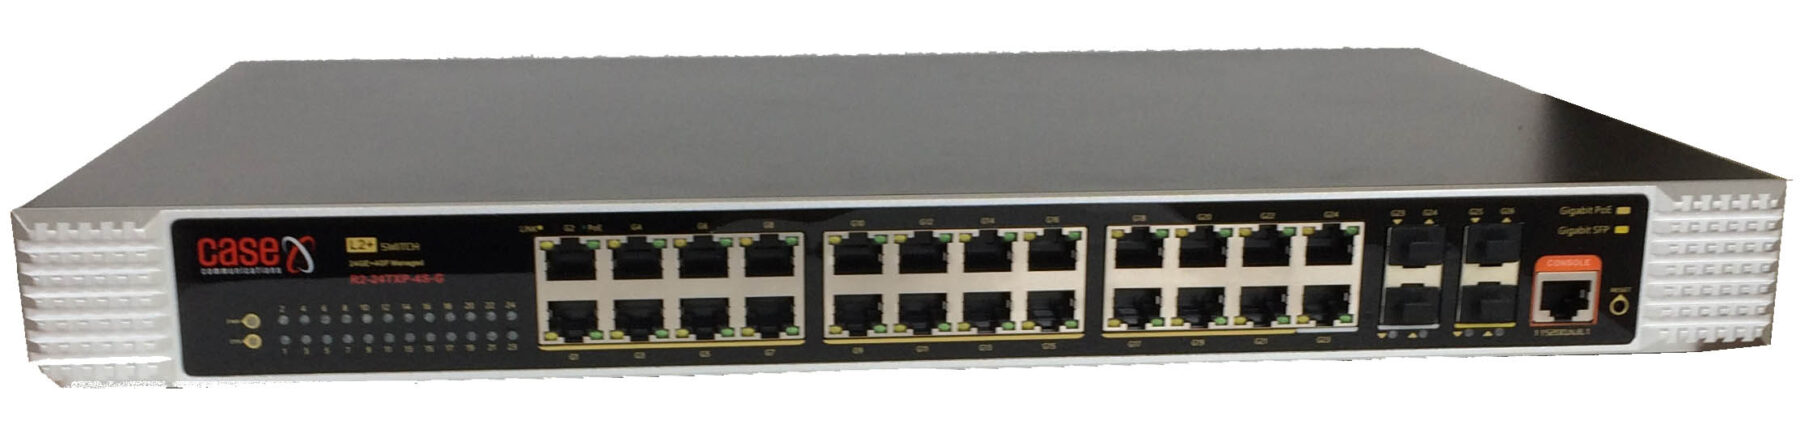 24 Port Industrial PoE Switch with 4 x Fibre ports